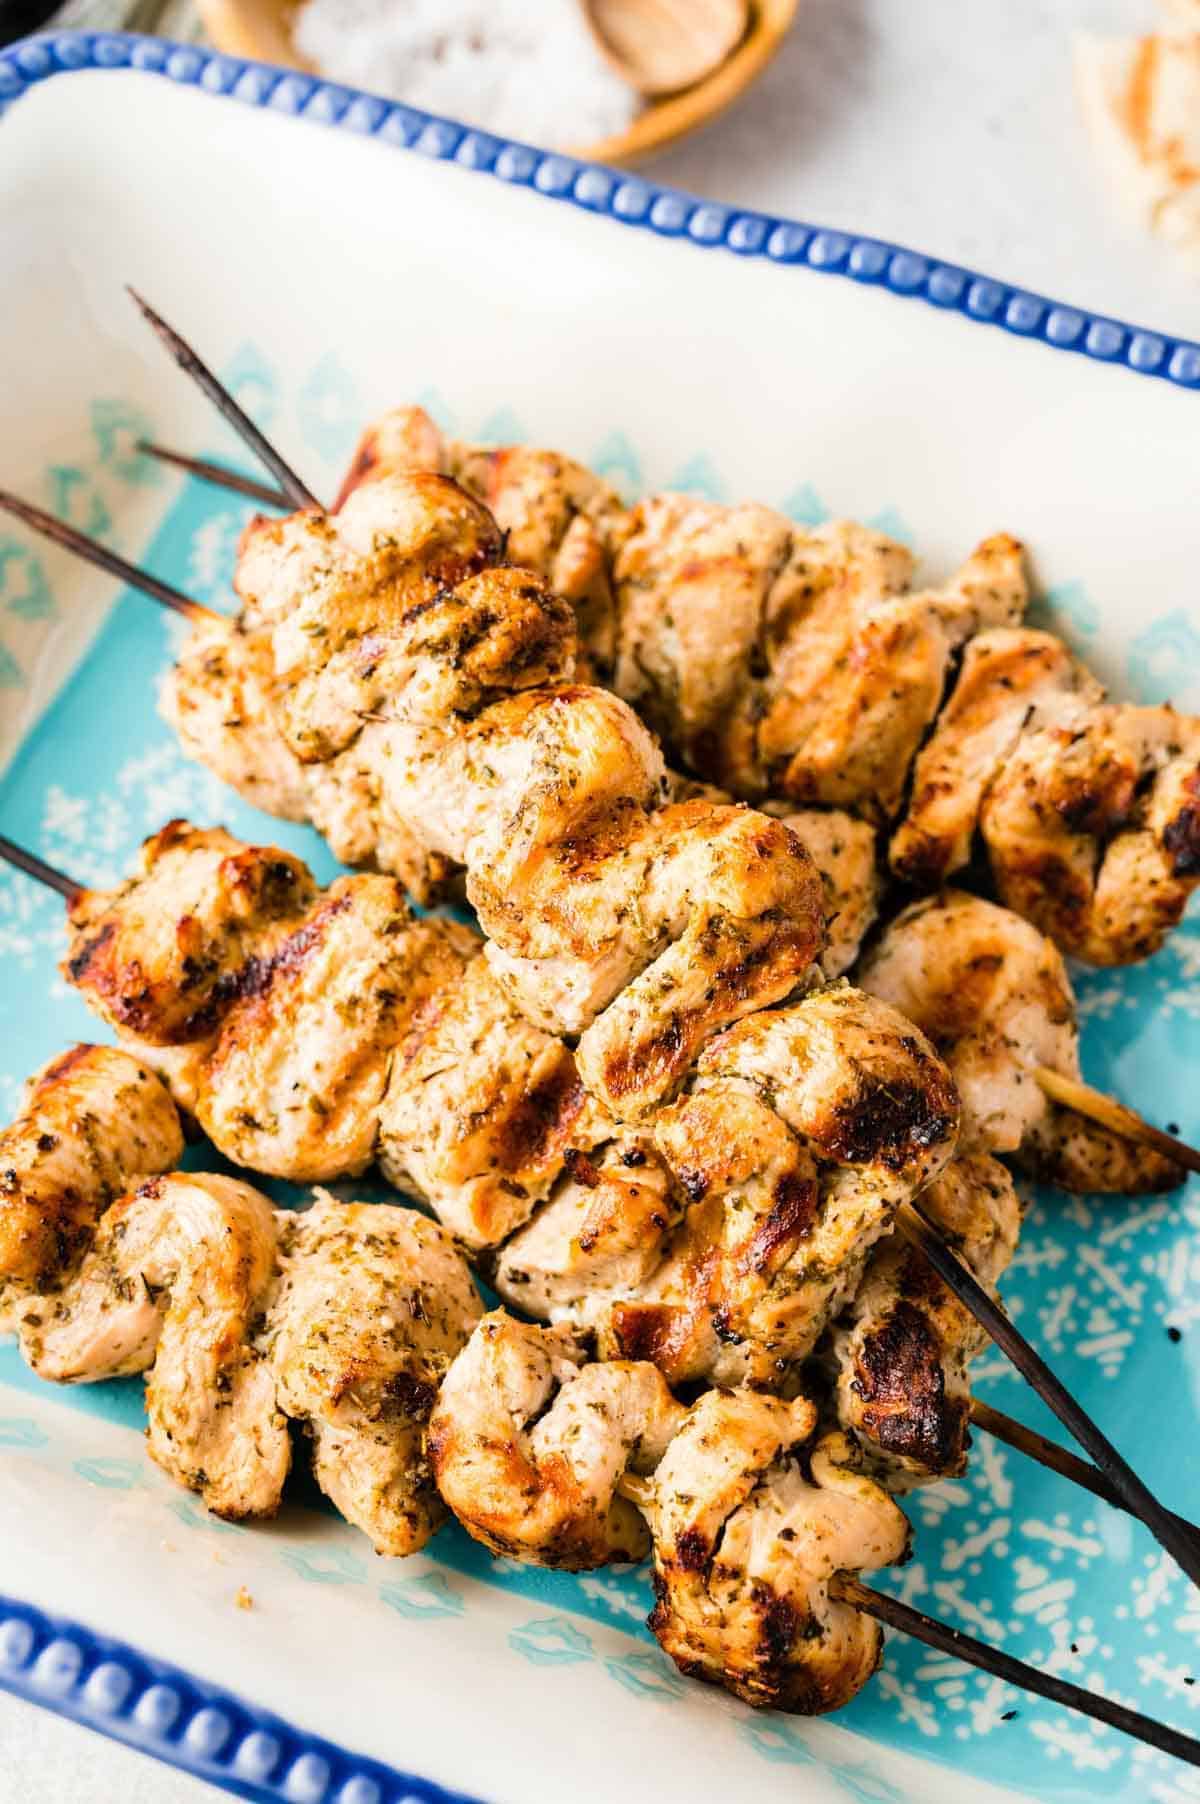 A Close-Up Shot of Grilled Chicken Souvlaki in a Pan